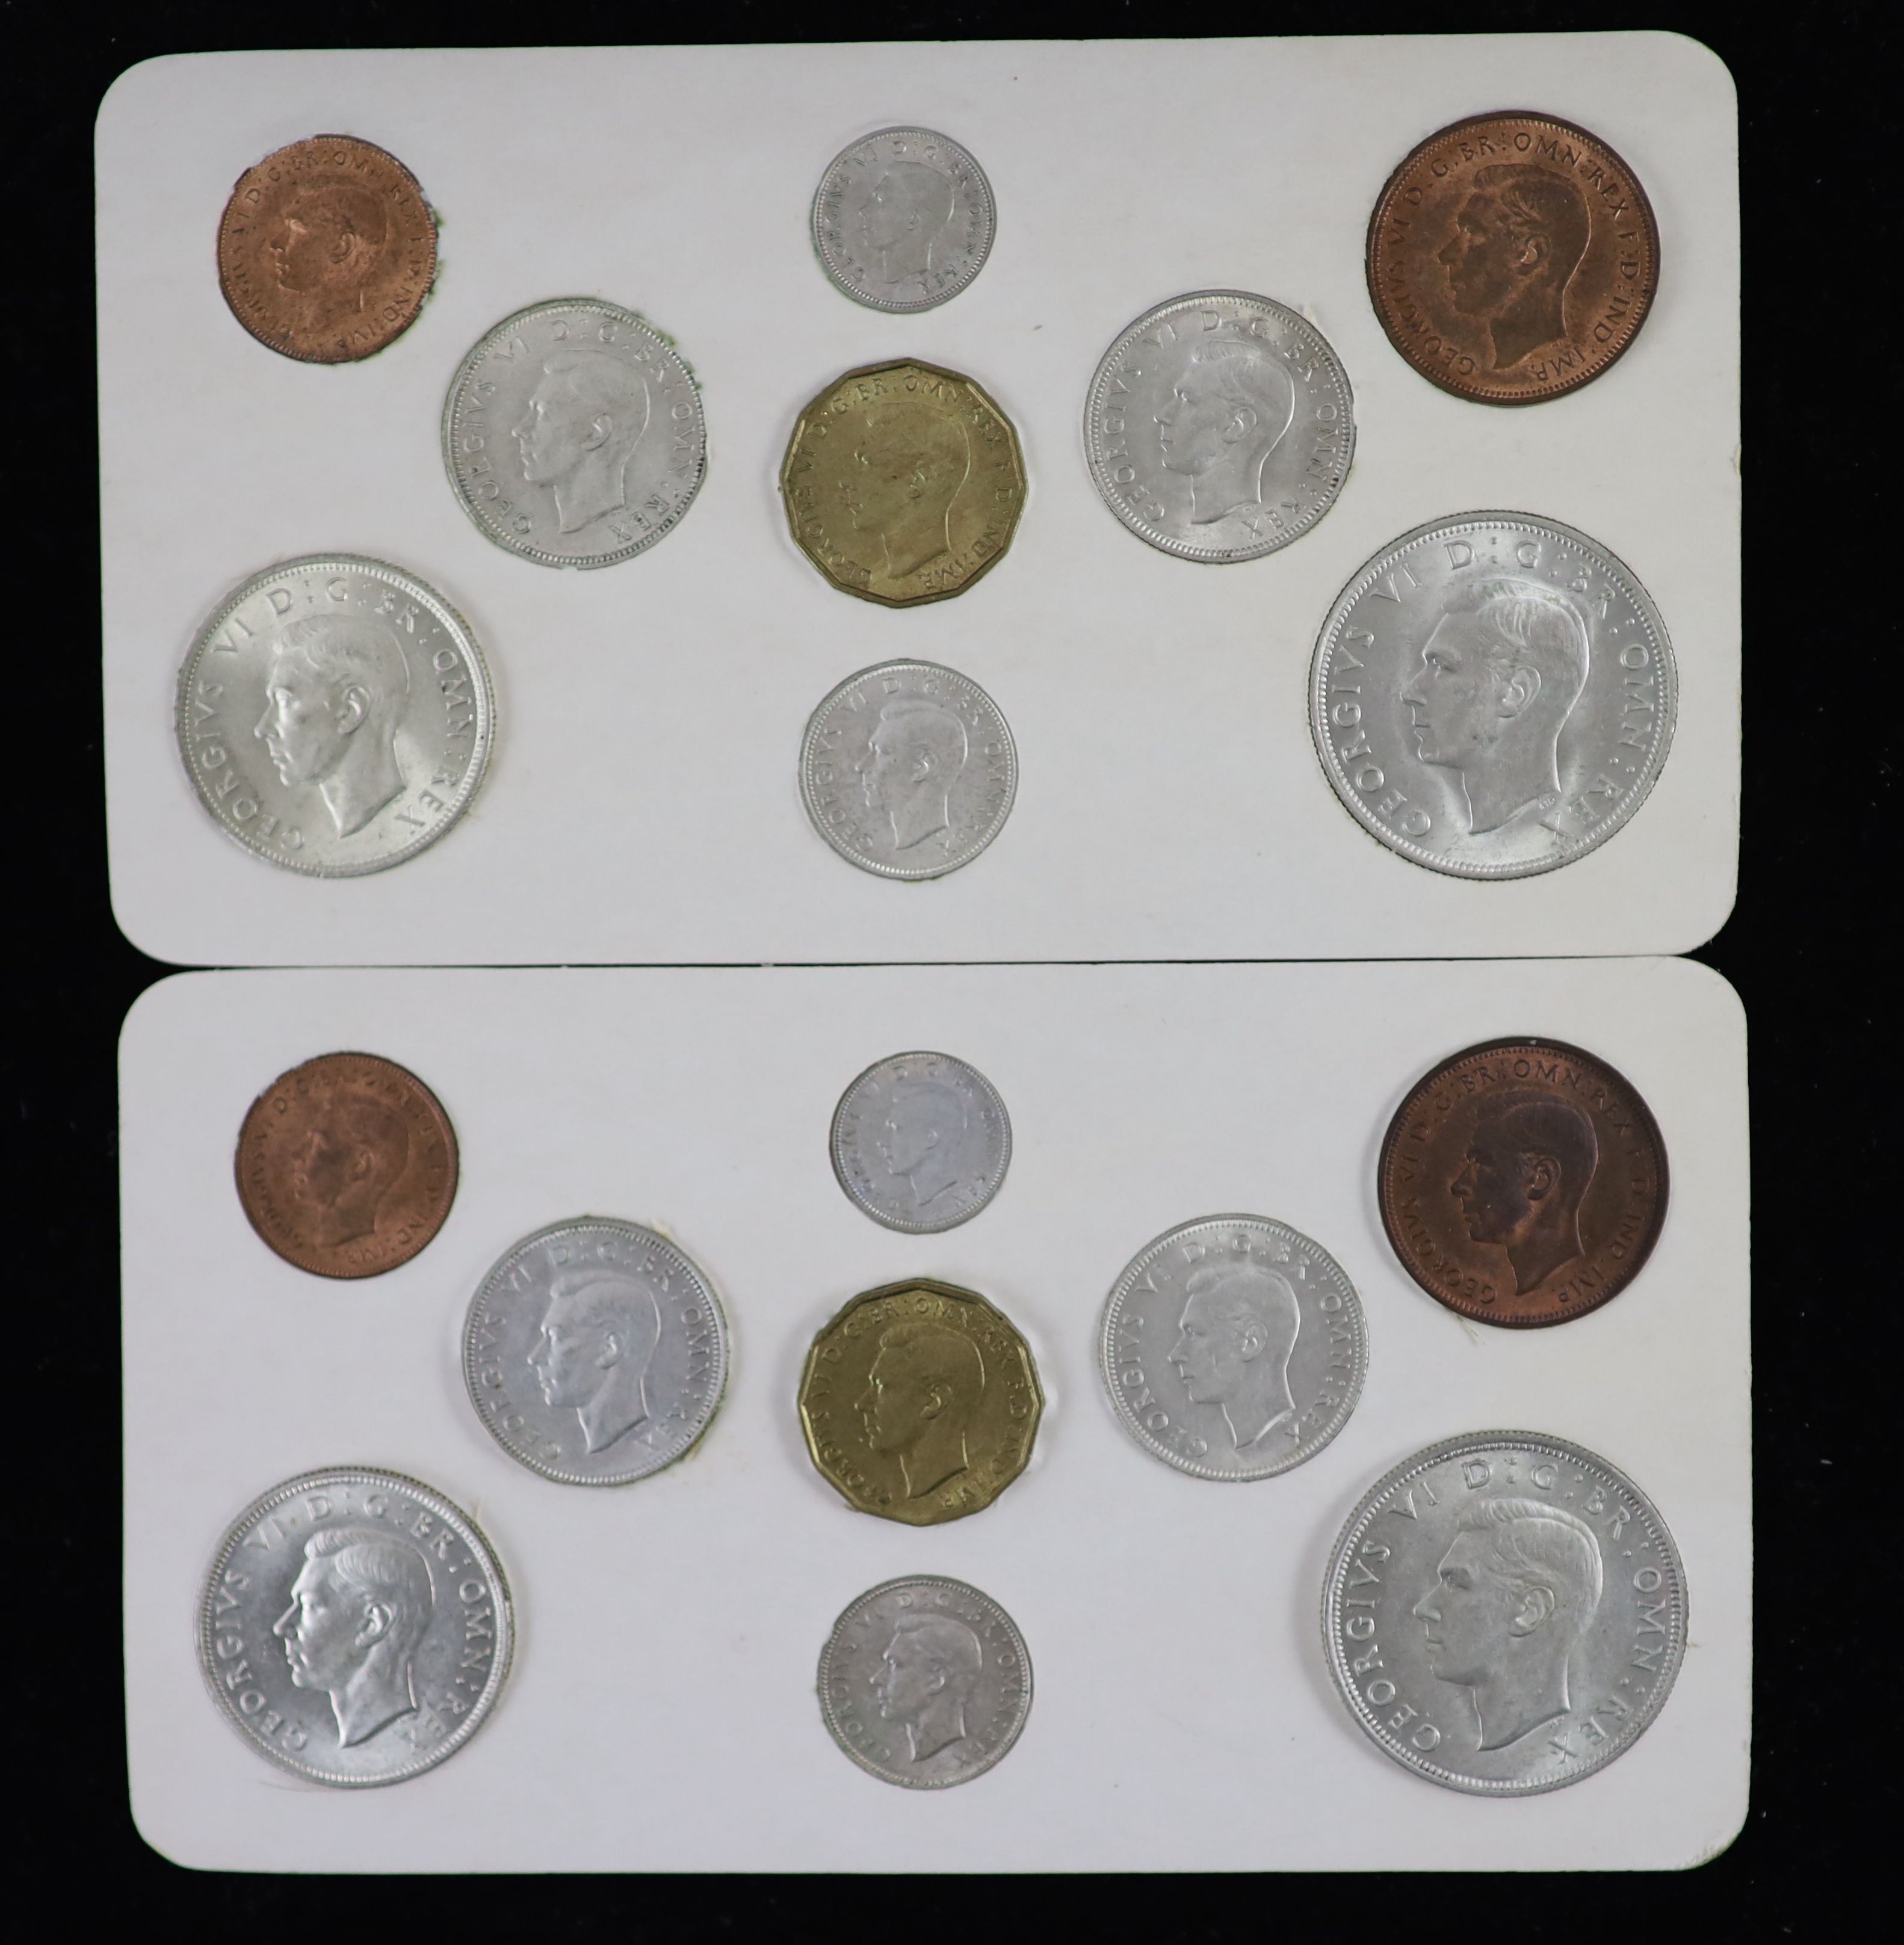 George VI specimen coin sets for 1938, 1939, 1940, 1941, 1942 and 1943, first coinage, the majority about EF or better